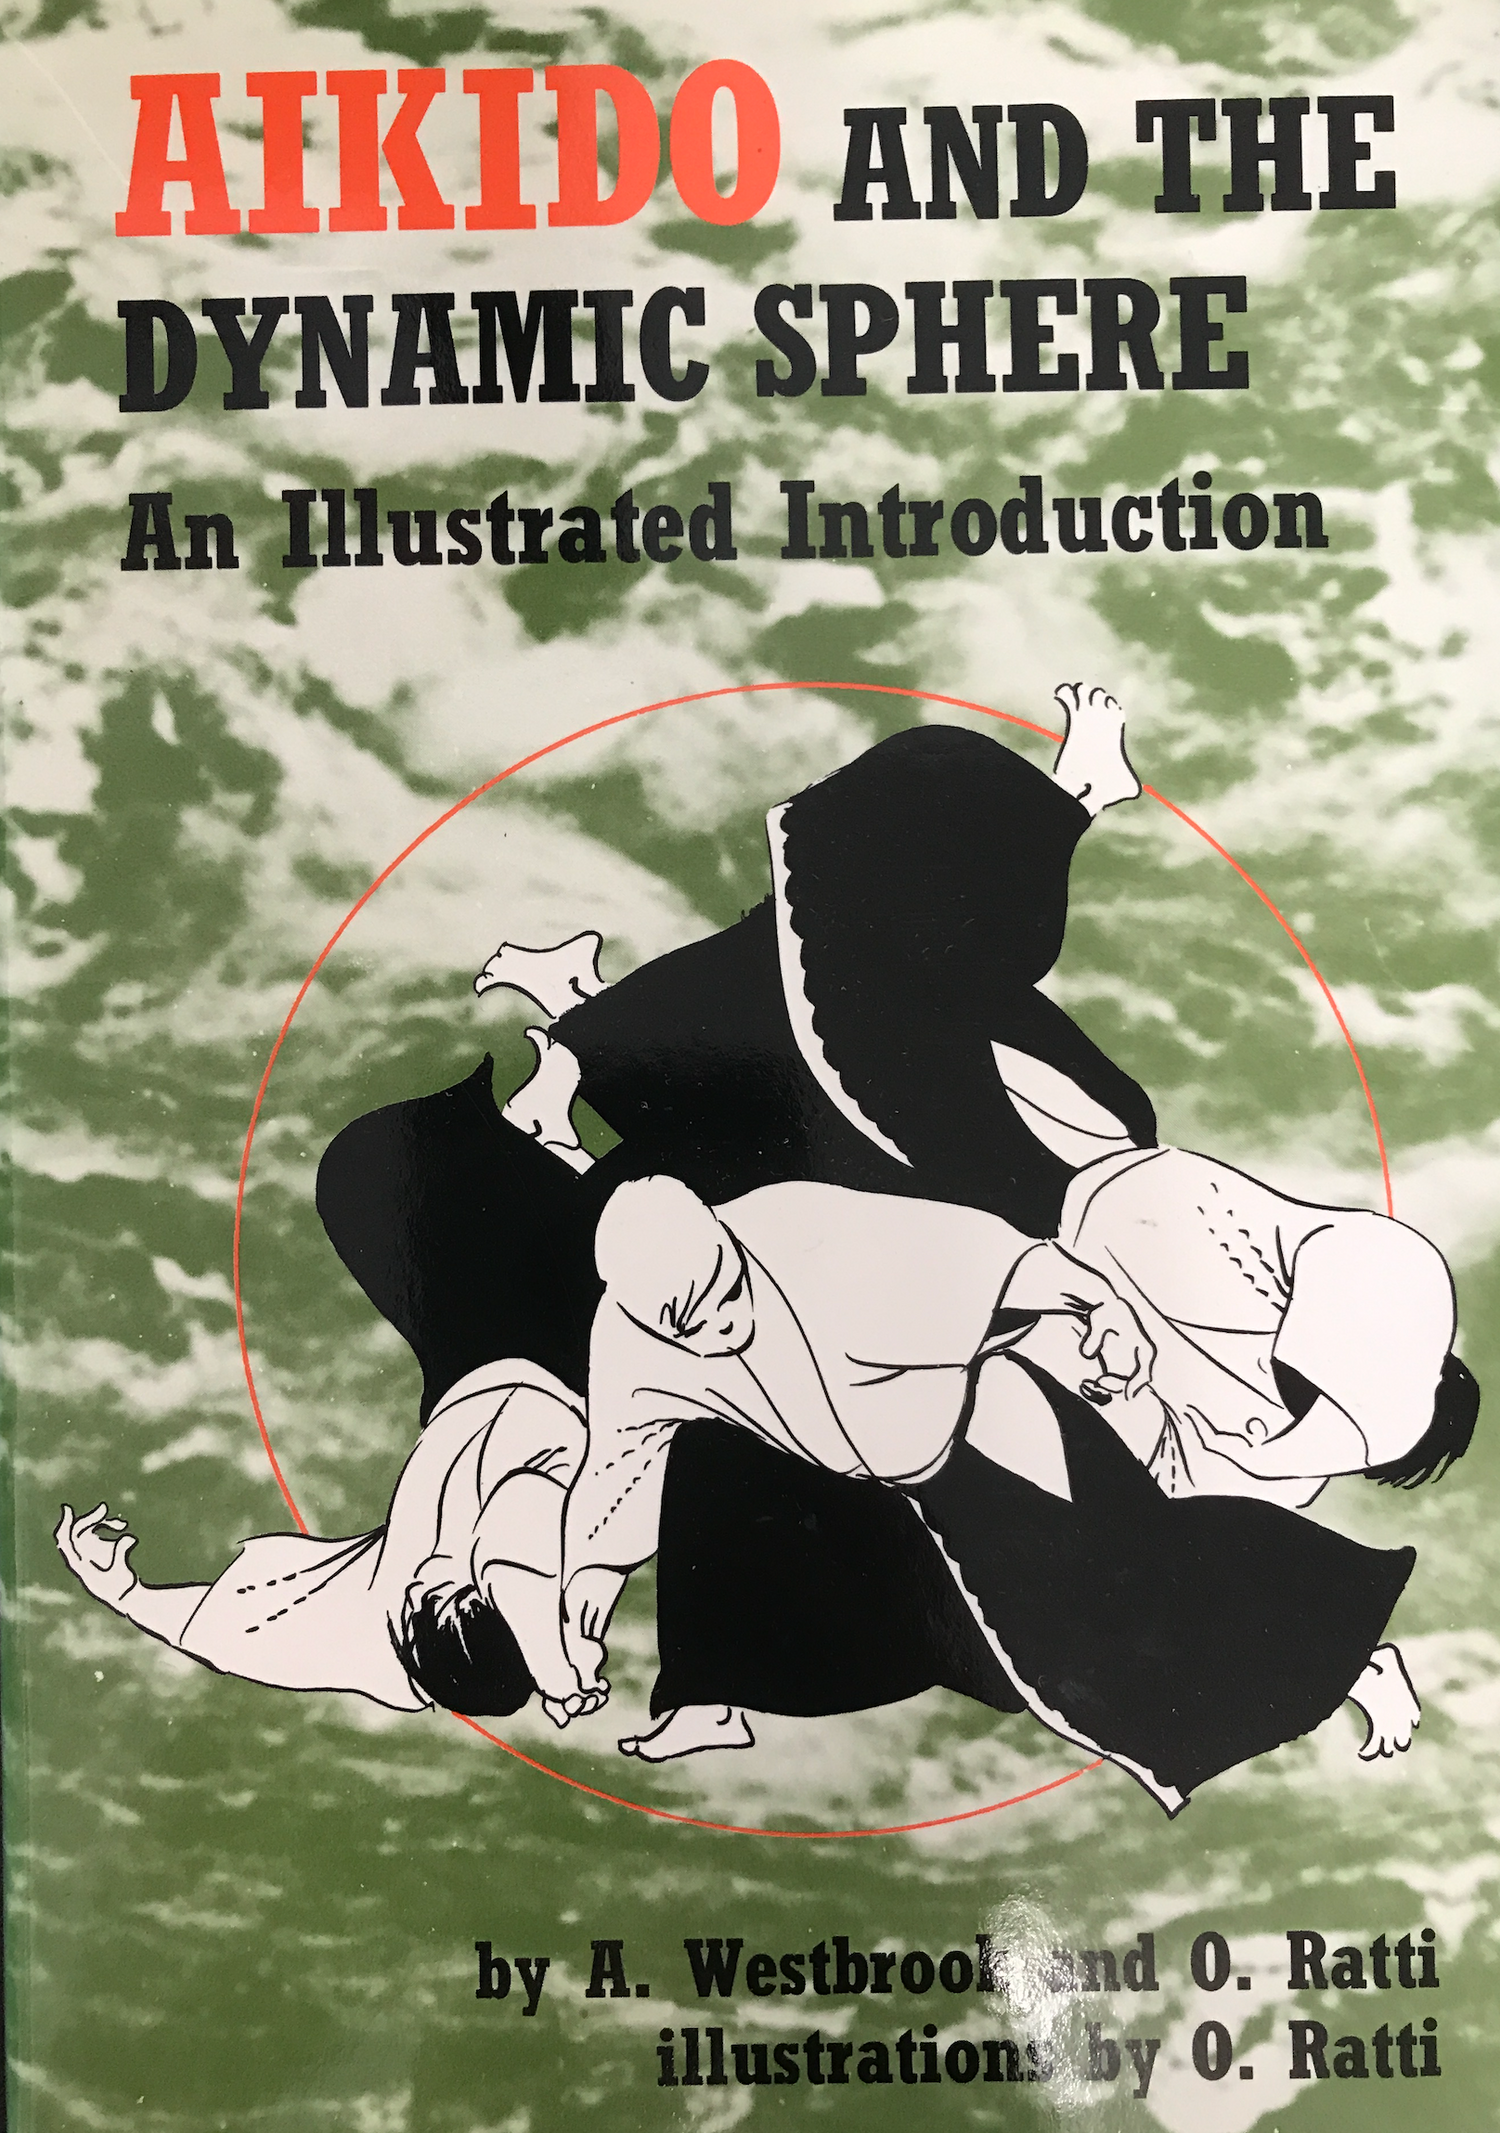 Aikido and the Dynamic Sphere: An Illustrated Introduction Book by Adele Westbrook & Oscar Ratti (Preowned) - Budovideos Inc